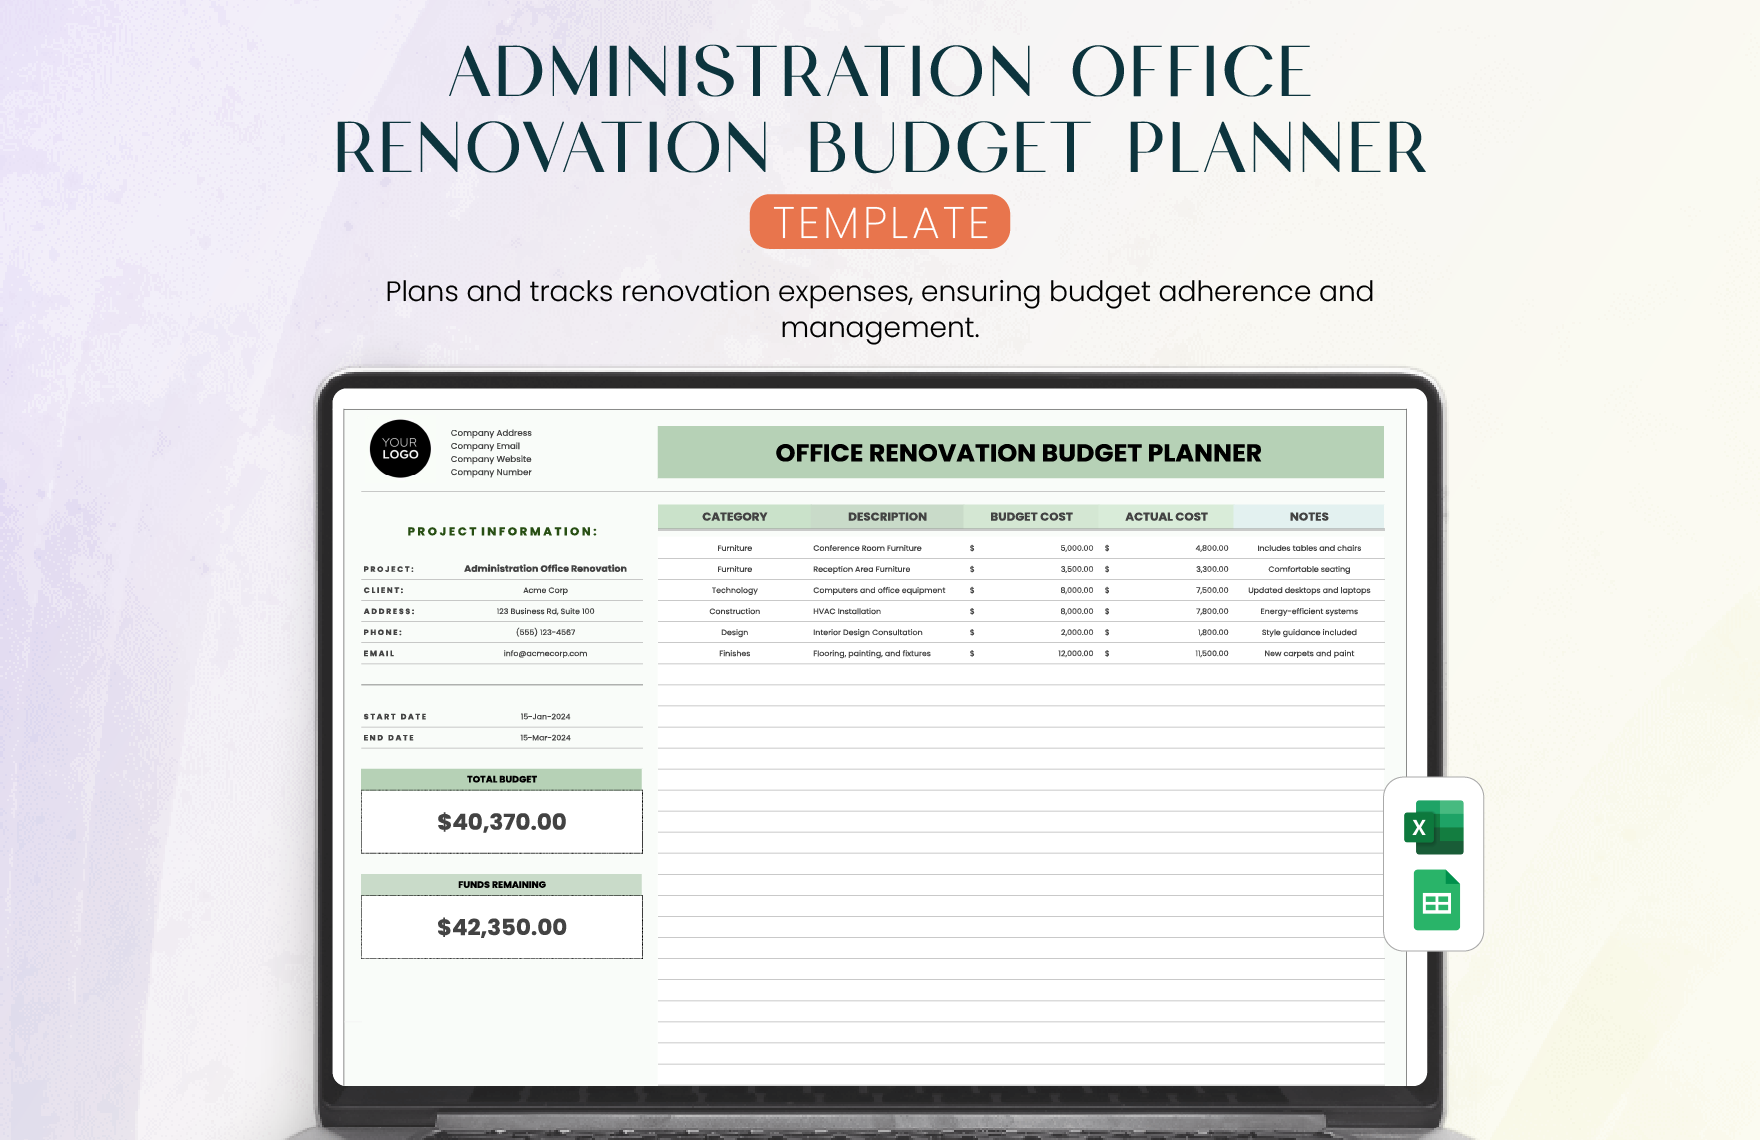 Administration Office Renovation Budget Planner Template in Excel, Google Sheets